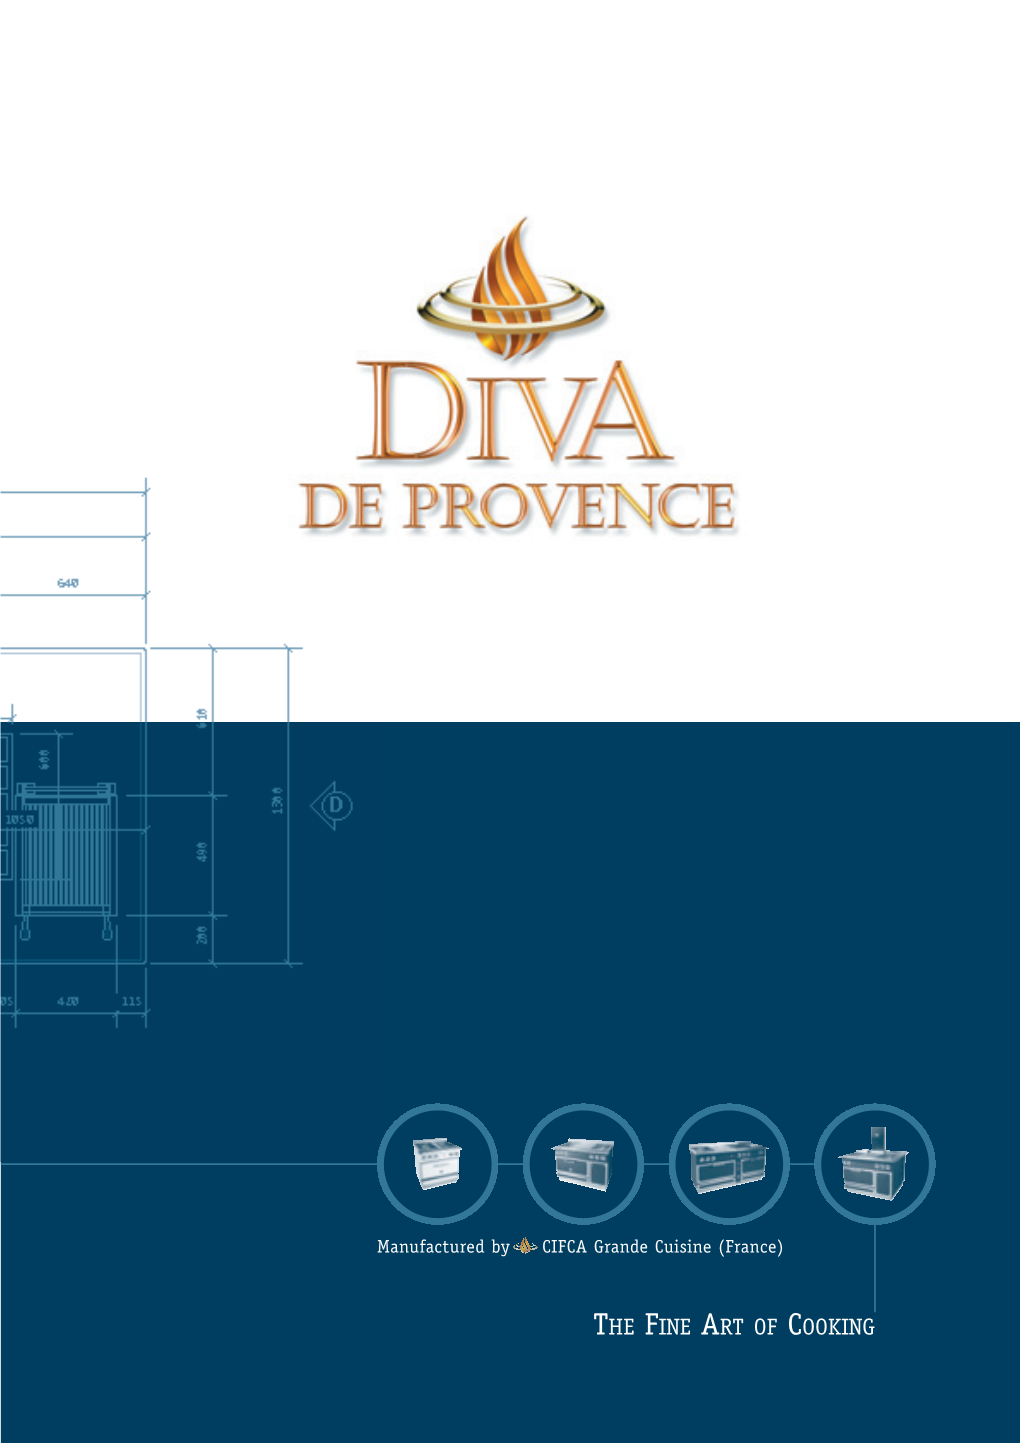 Diva De Provence from the Kitchens of the World’S Greatest Chef